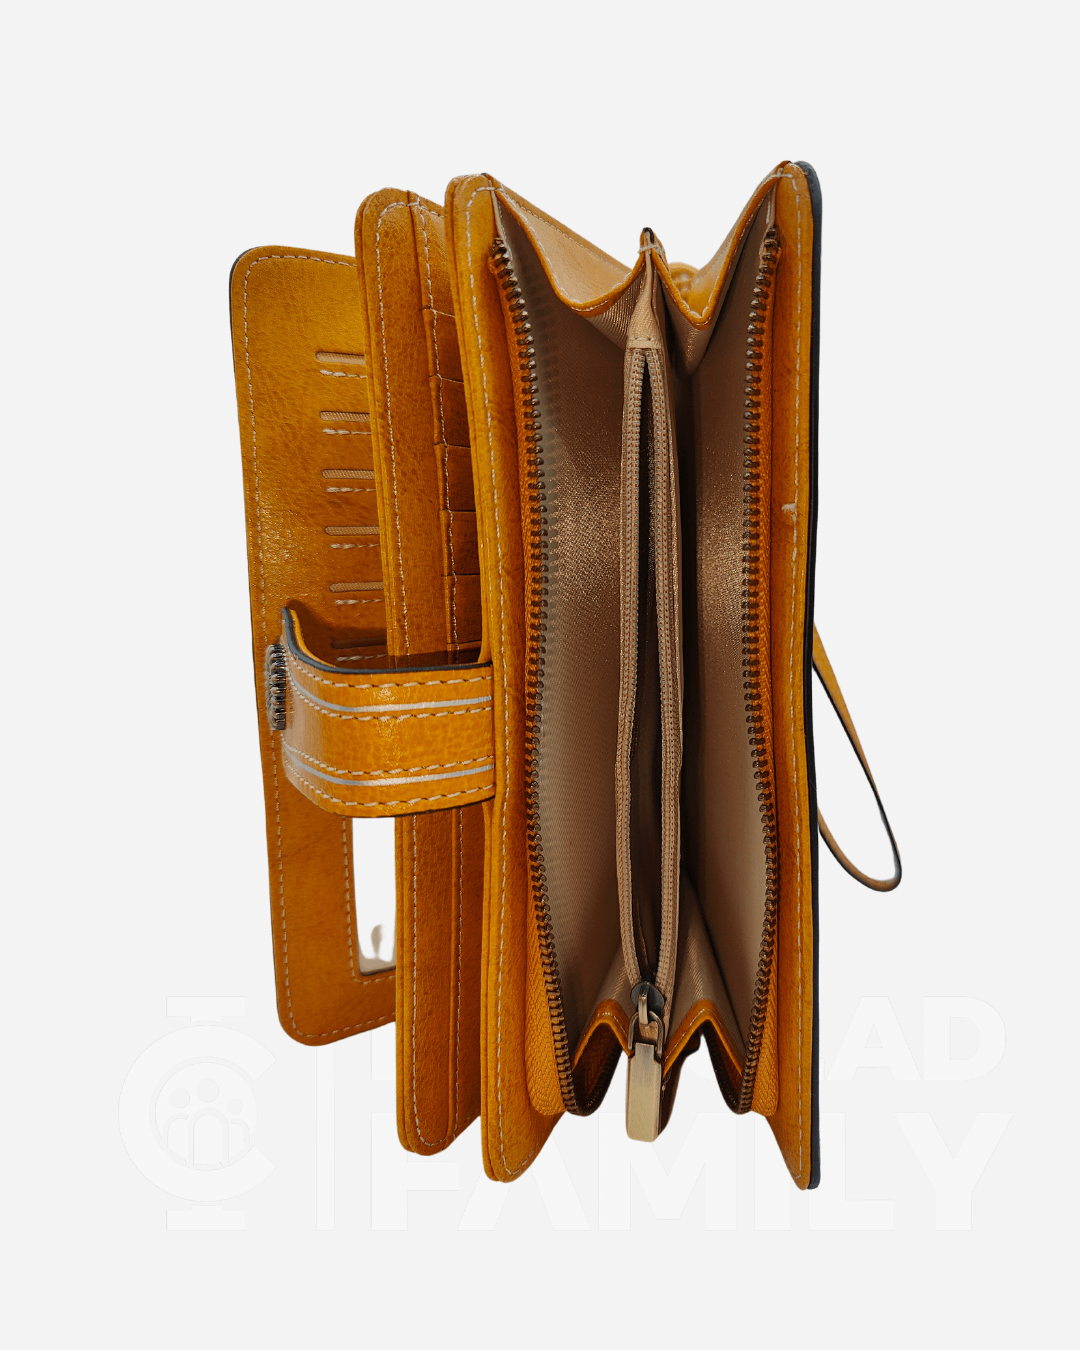 RFID blocking wallet with dual compartments